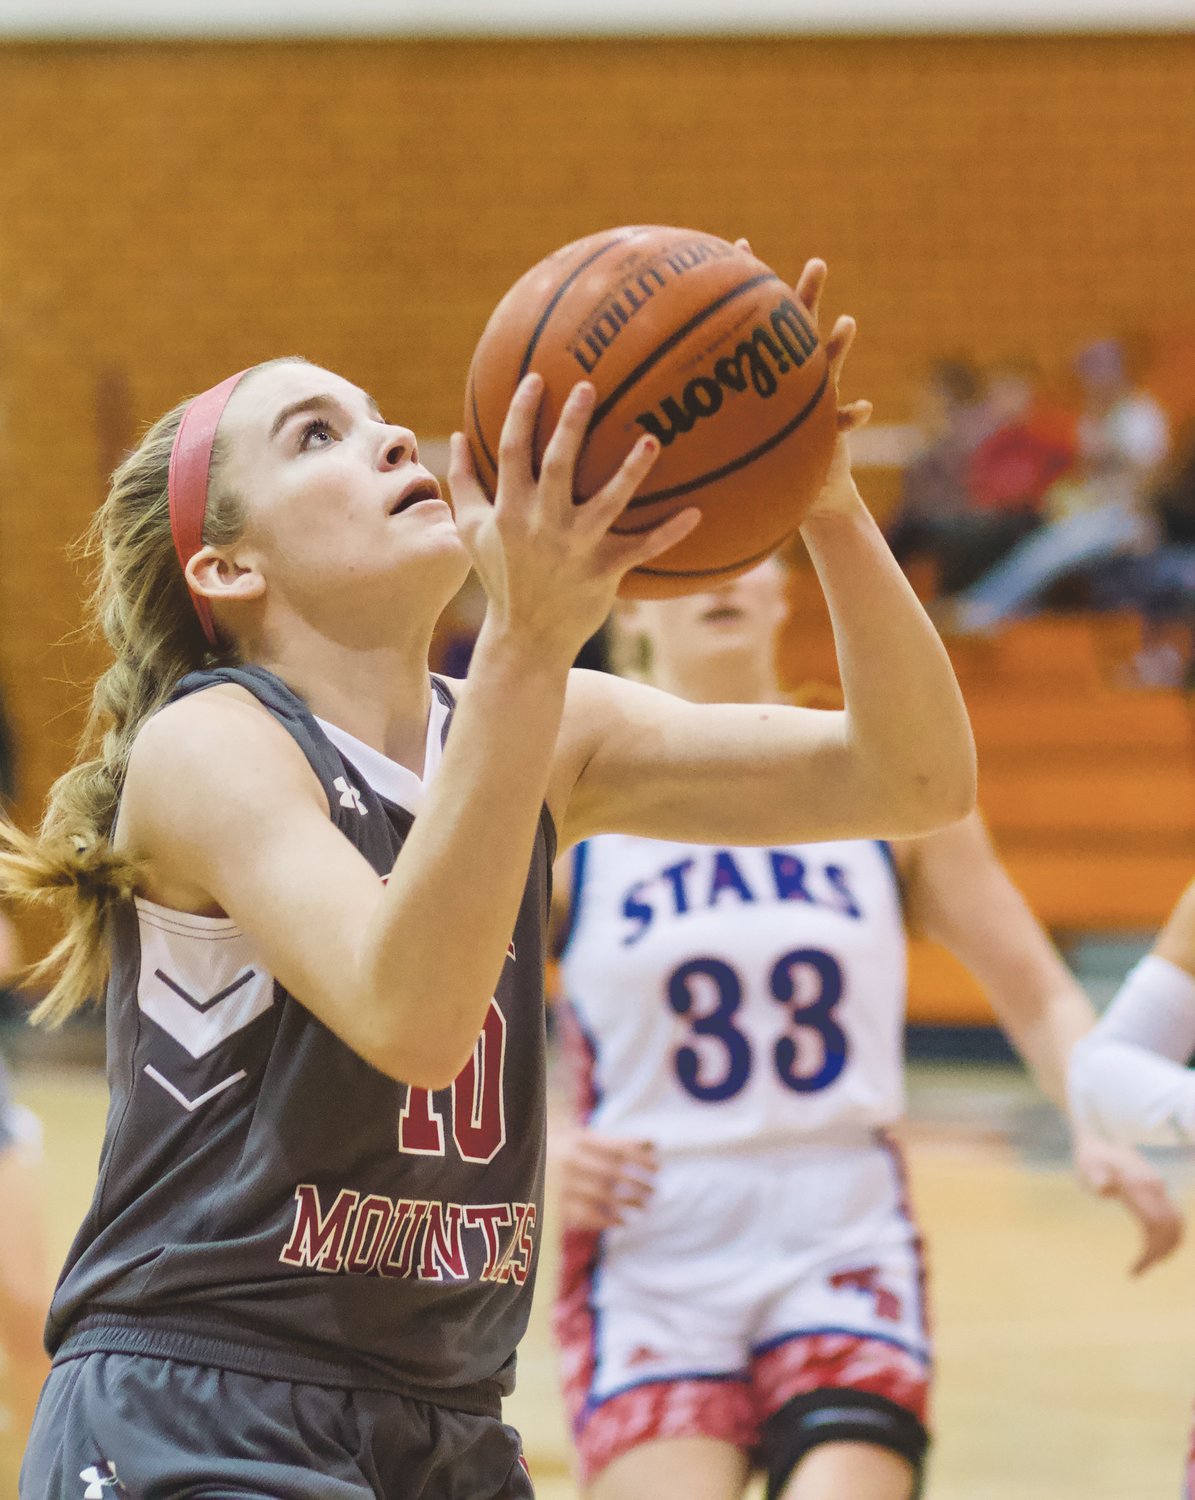 Sidney Veatch looks to score against Western Boone in the Sugar Creek Classic Championship game. The junior was named to the all-tourney team.